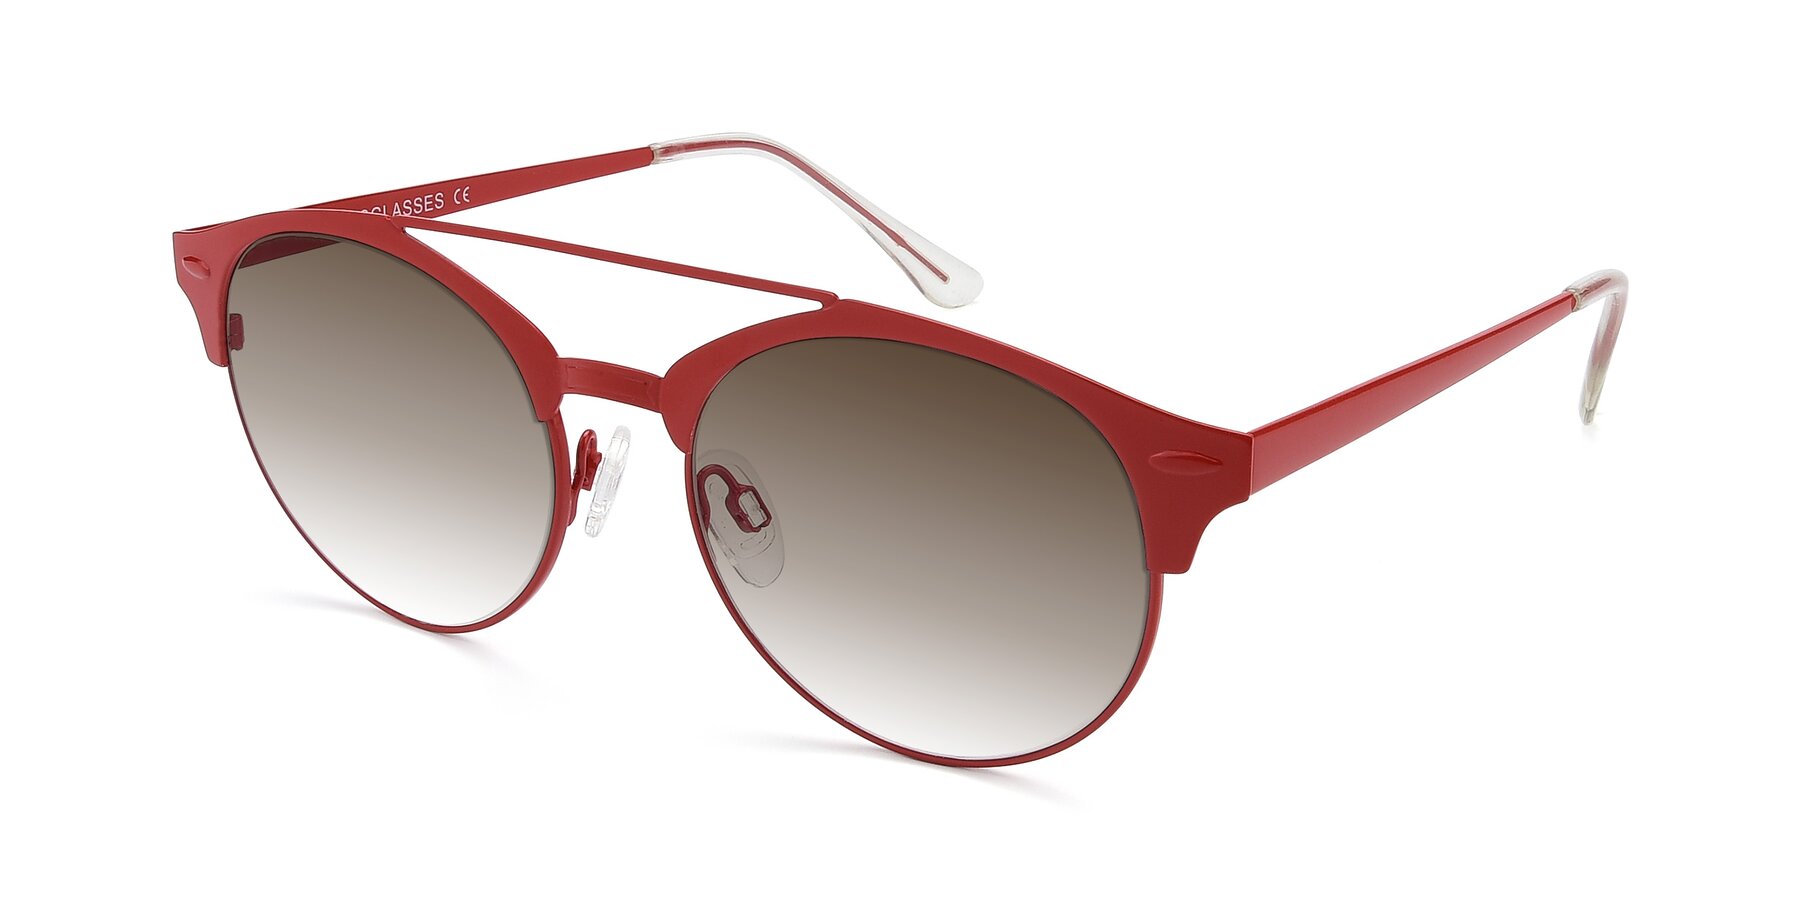 Angle of SSR183 in Red with Brown Gradient Lenses